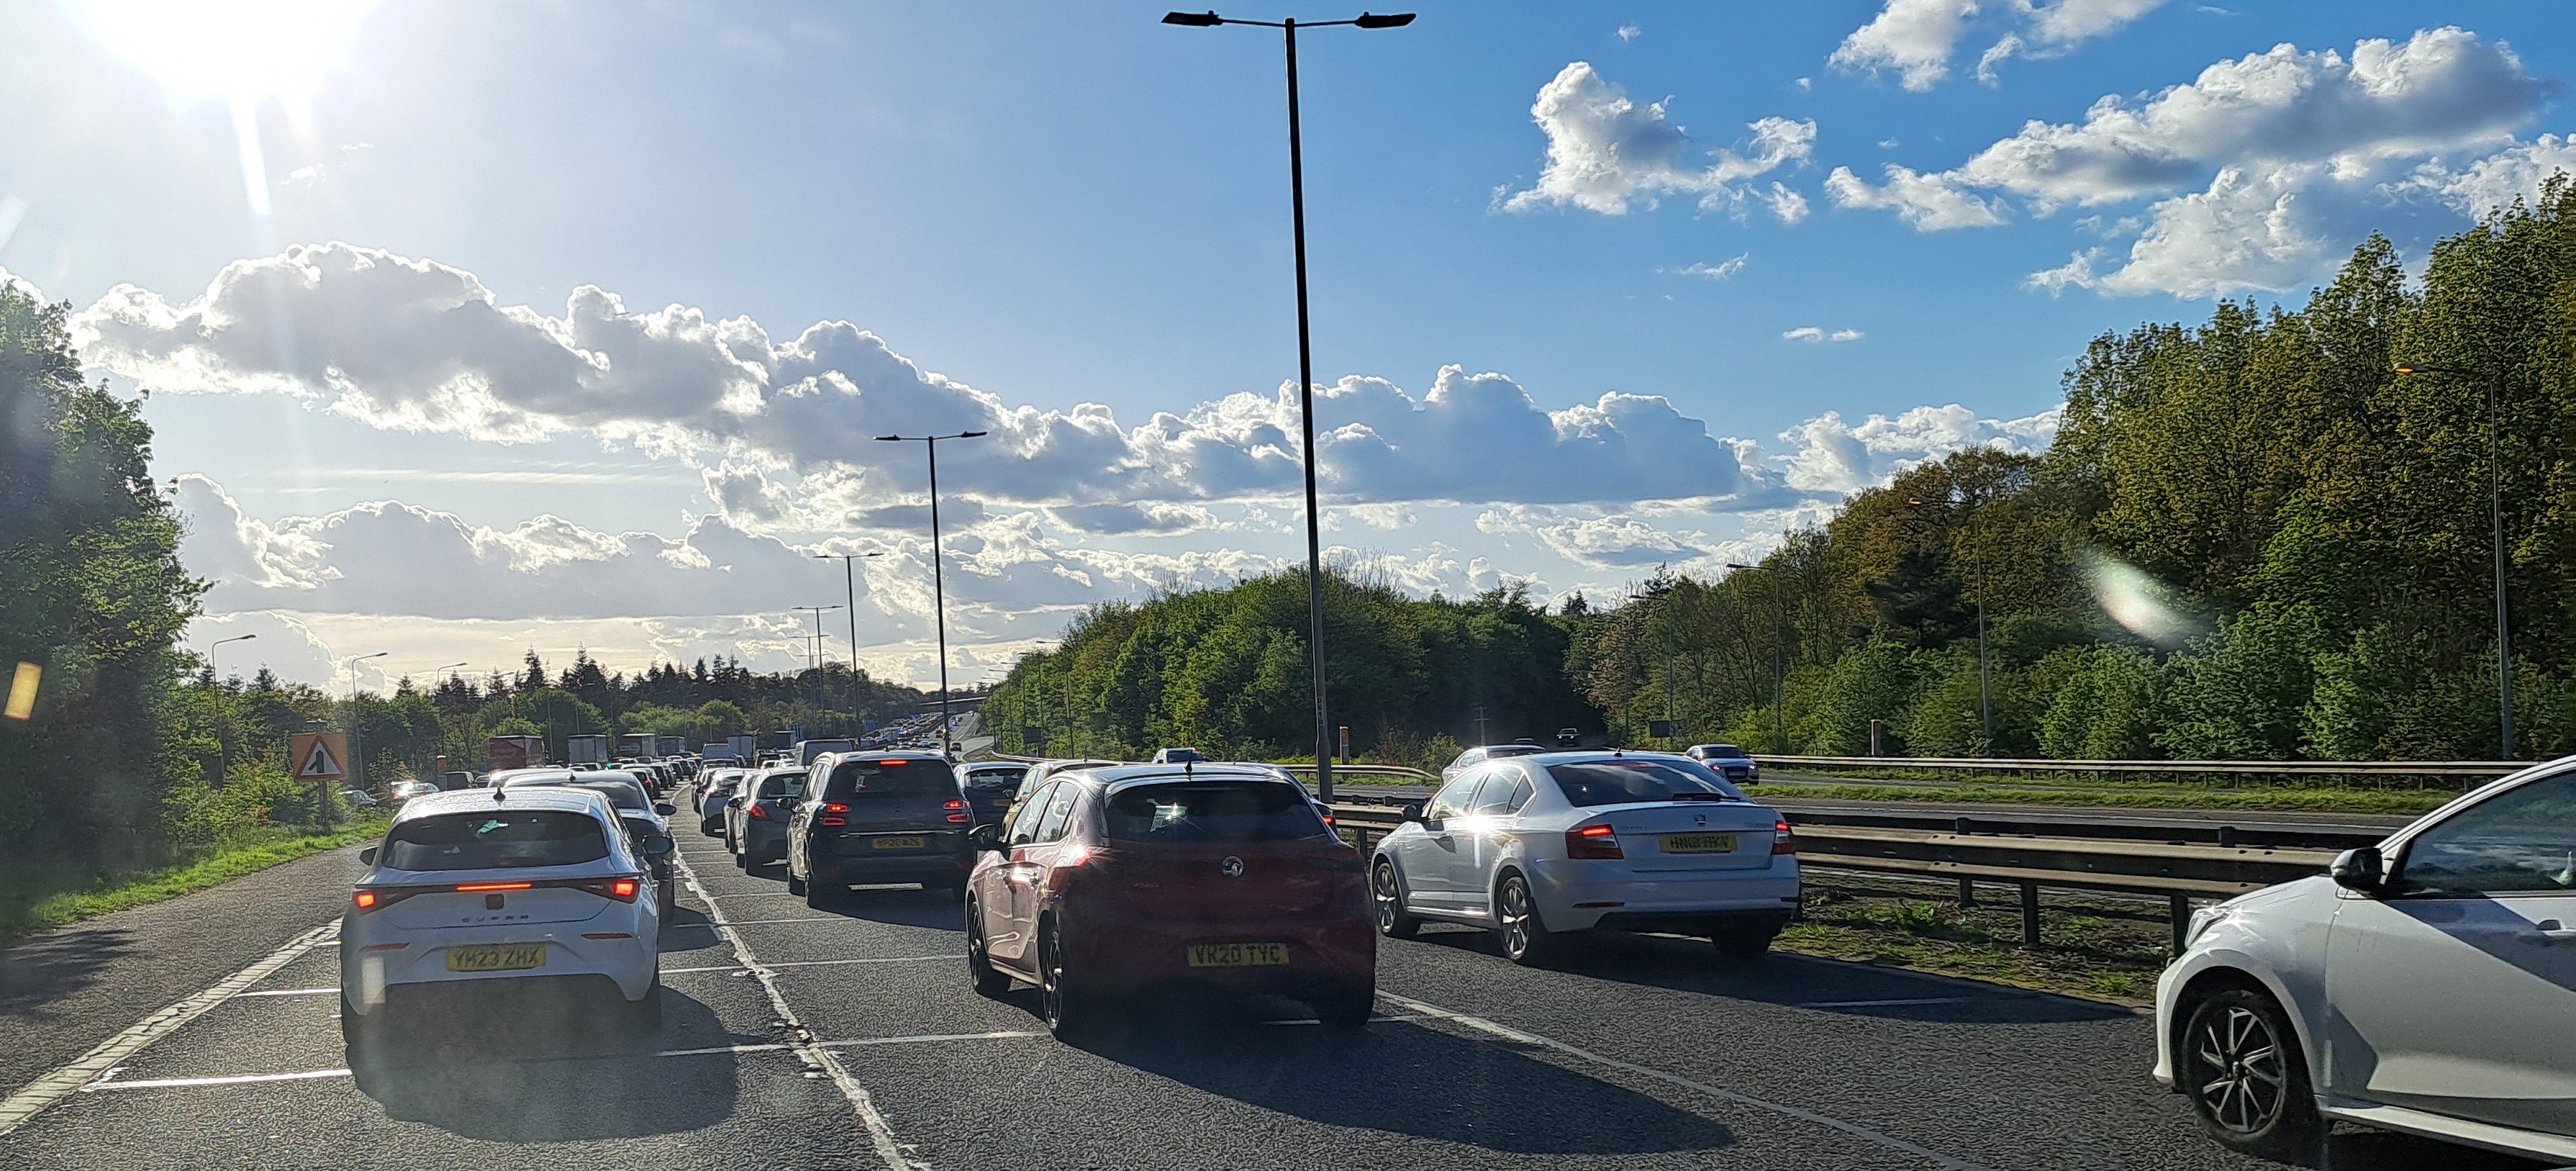 My view on the M40 – Warwick Services not pictured (unfortunately)